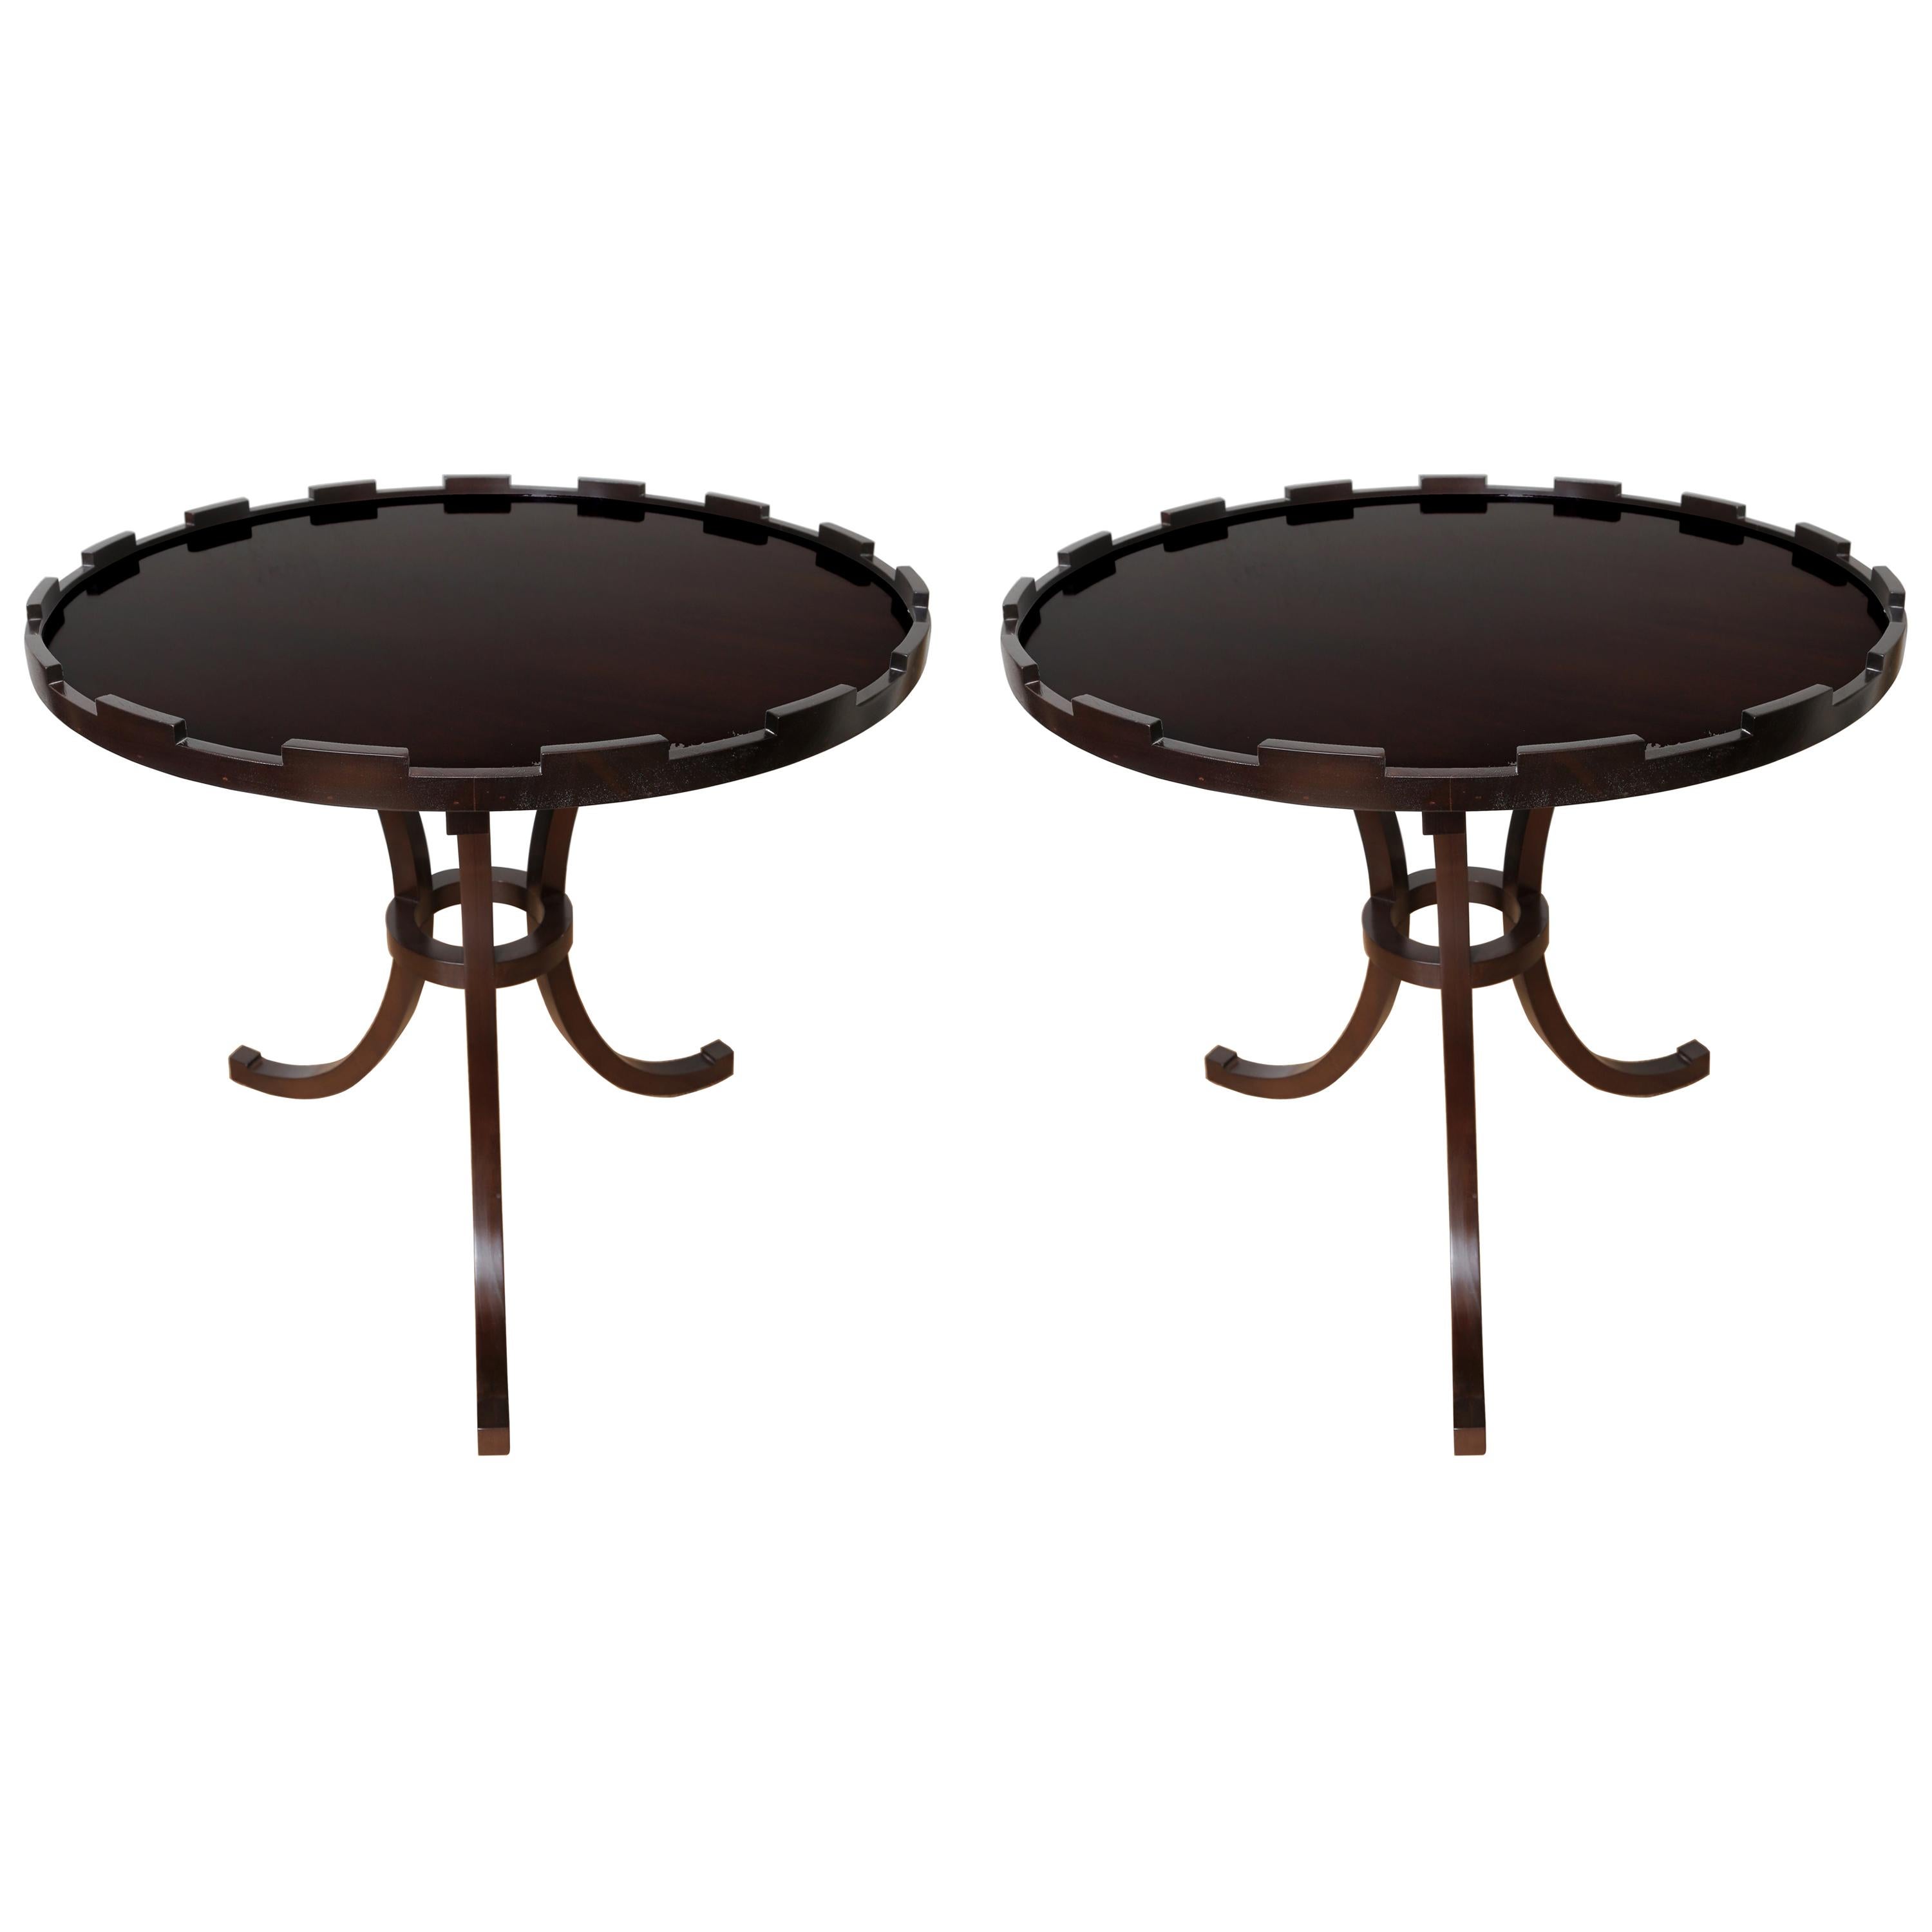 Pair of Art Deco Style Round Side Tables by Baker